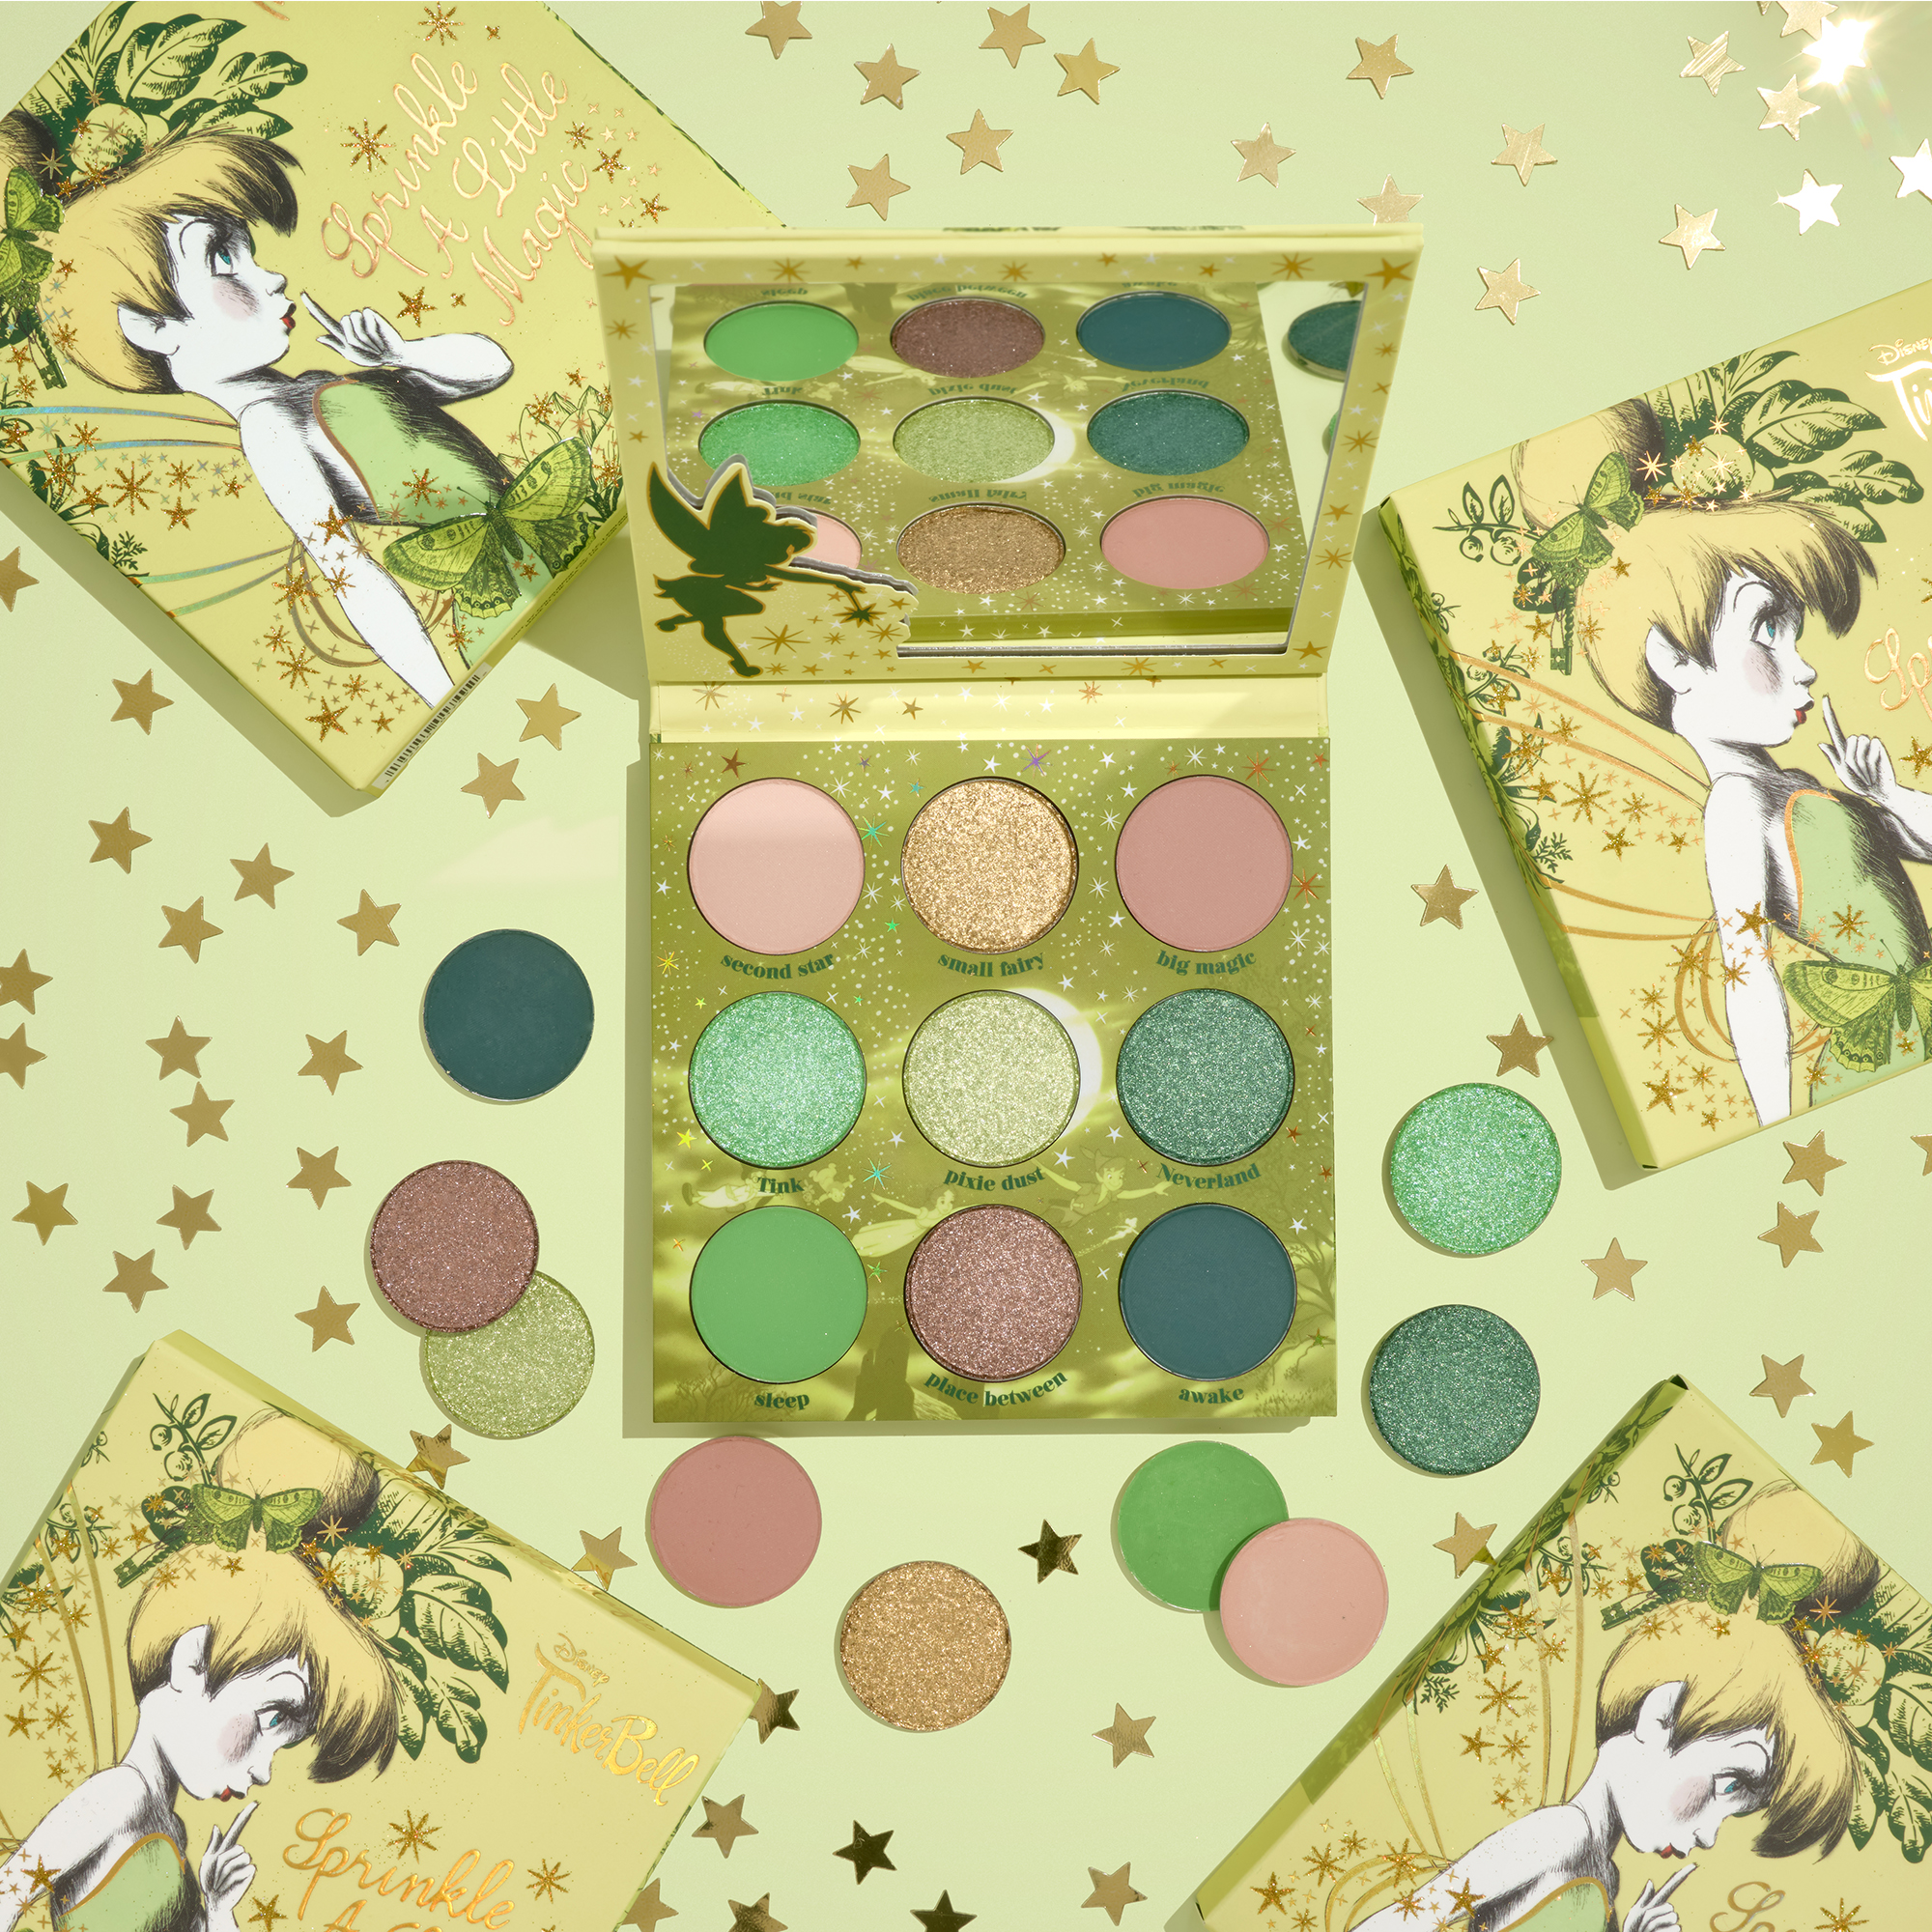 PHOTO: “Sprinkle a Little Magic” Palette from The Disney Tinker Bell and ColourPop Collection.